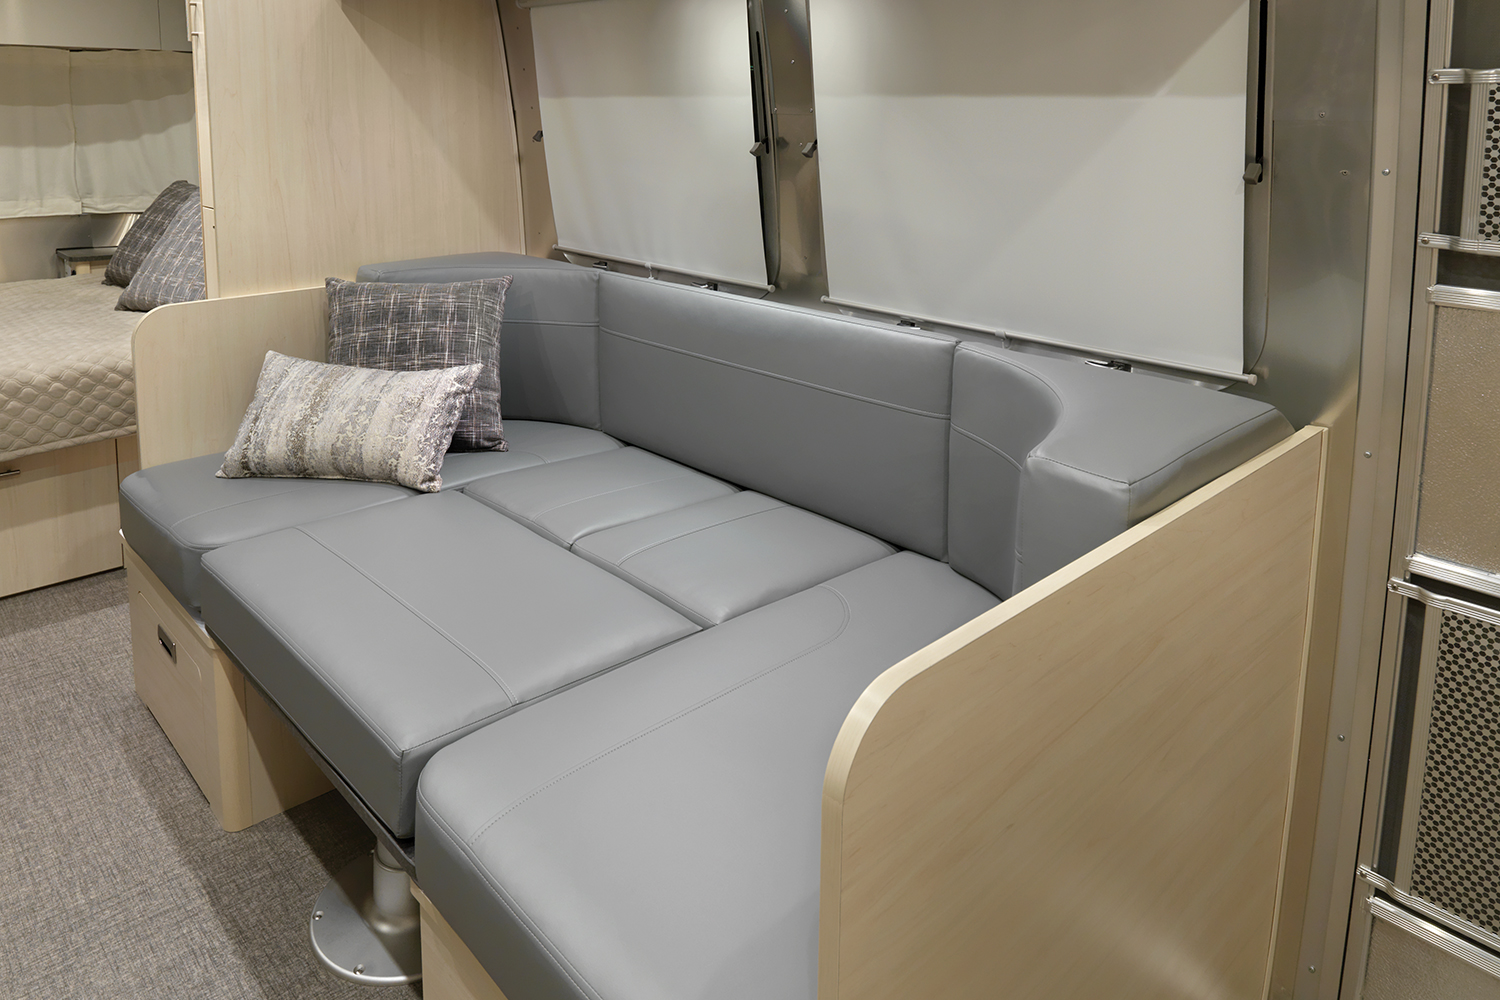 airstream flying cloud international updates 2022 2021 23fb interior daybed sunlit maple seattle mist 80701 web